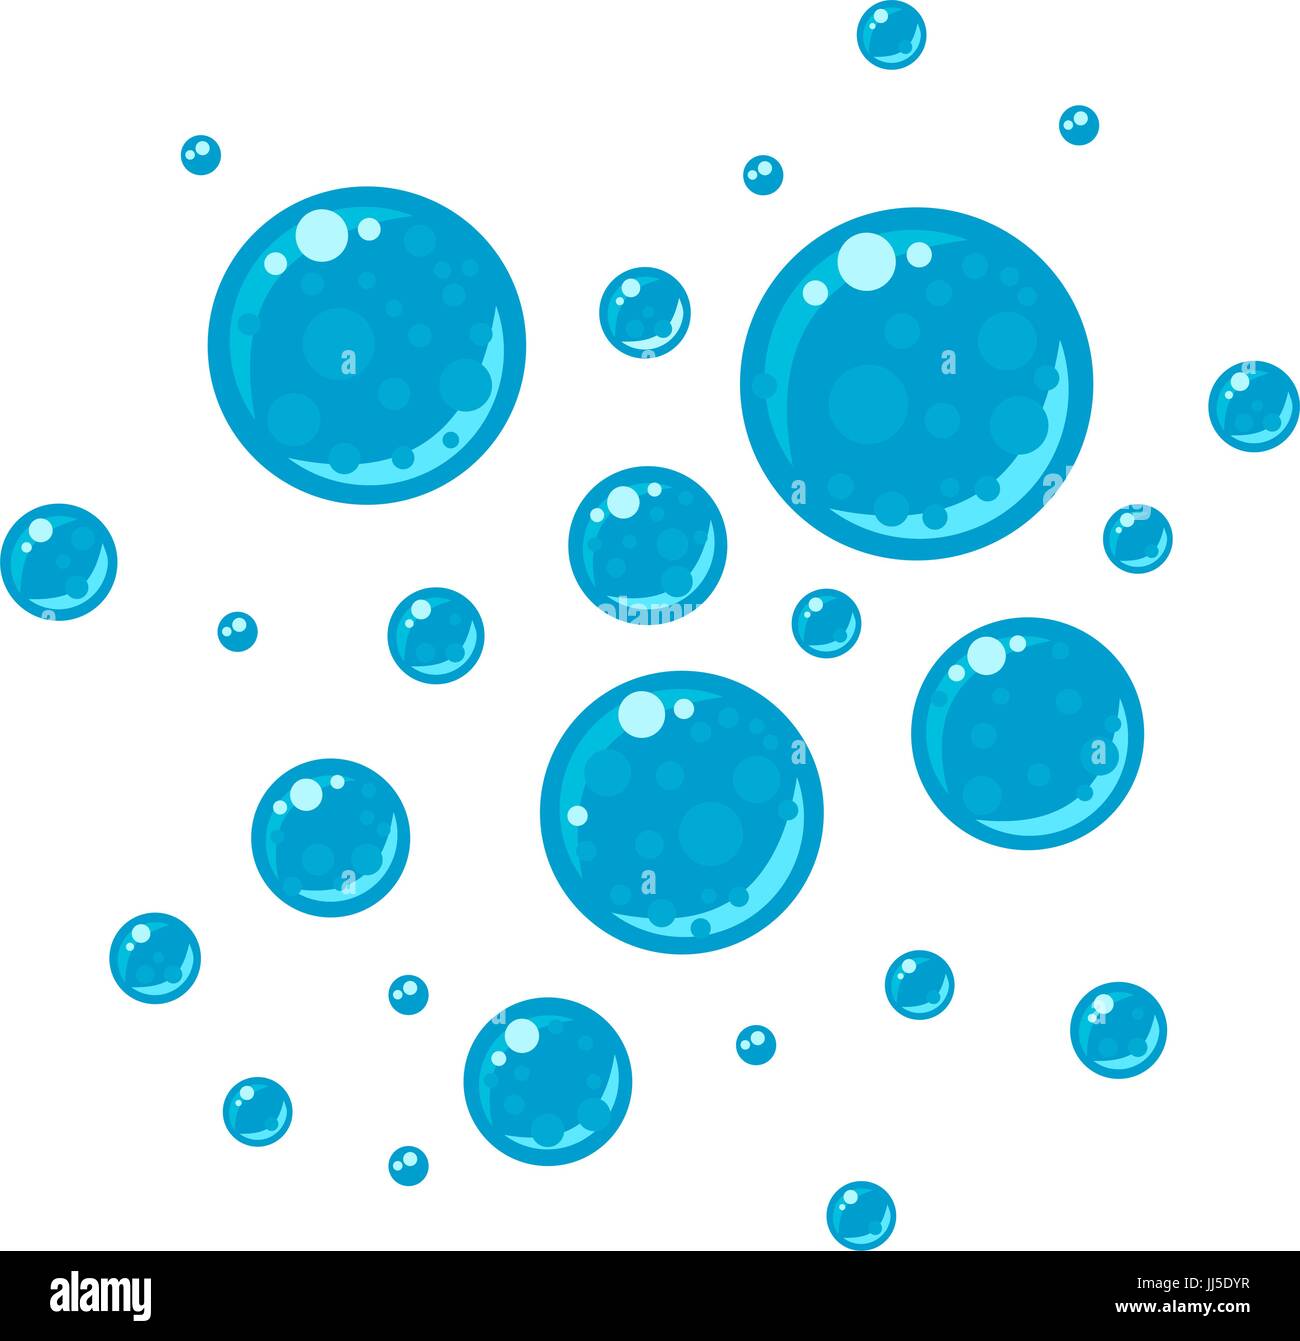 Soap bubbles in flat style isolated on white background. Stock Vector